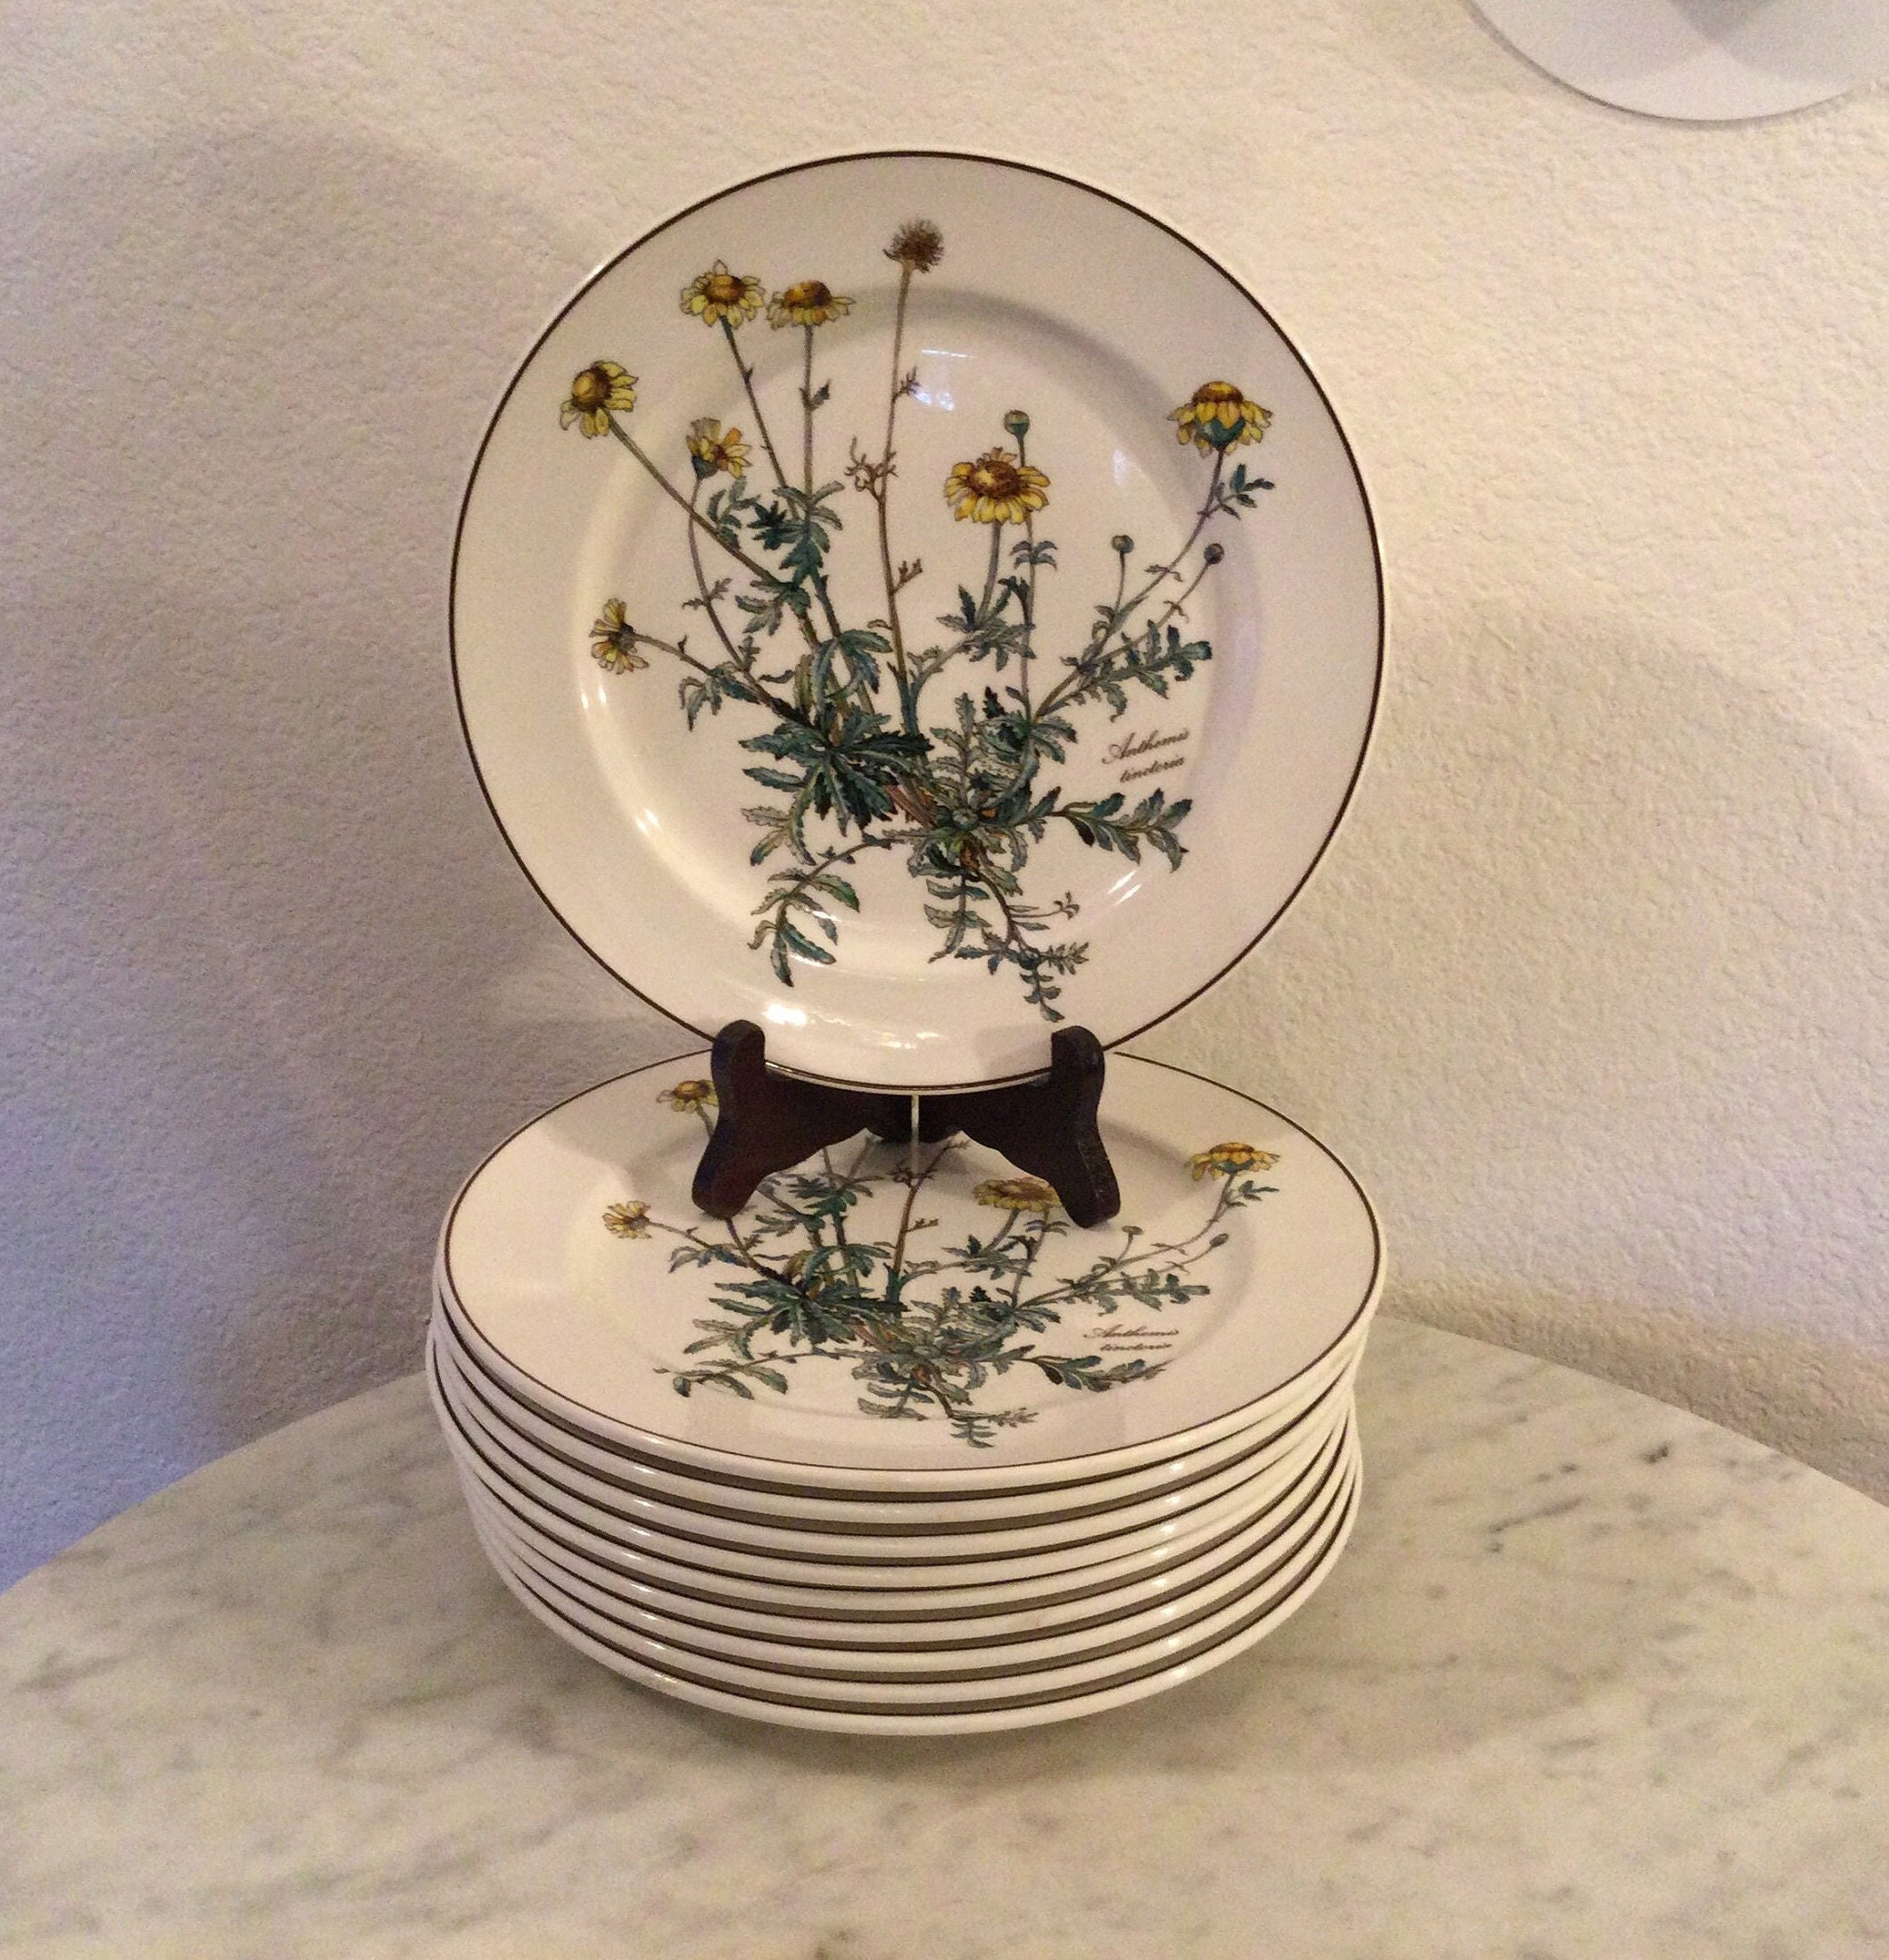 VILLEROY & BOCH BOTANICA Set of Ten 10 Luncheon Plates anthemis Lindoria.  Flowers, Leaves, Brown Trim. Germany. Discontinued. 